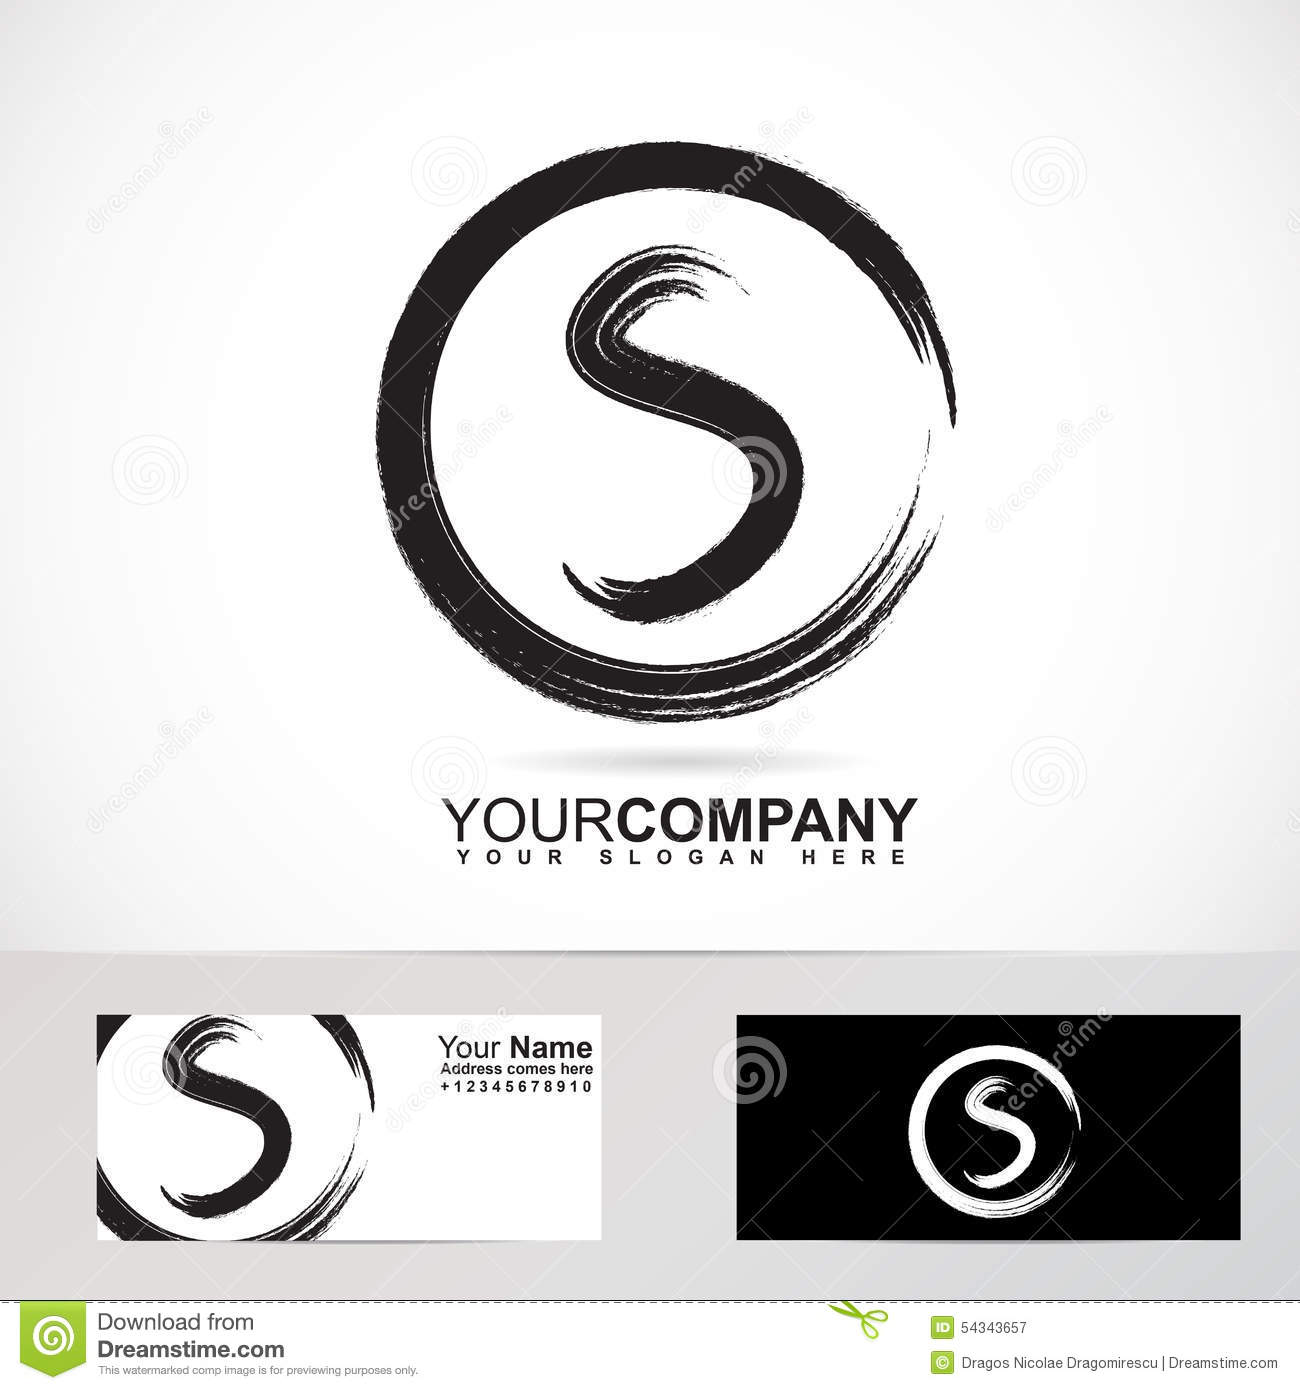 Company Letter S Circle Logo Template photo - 1